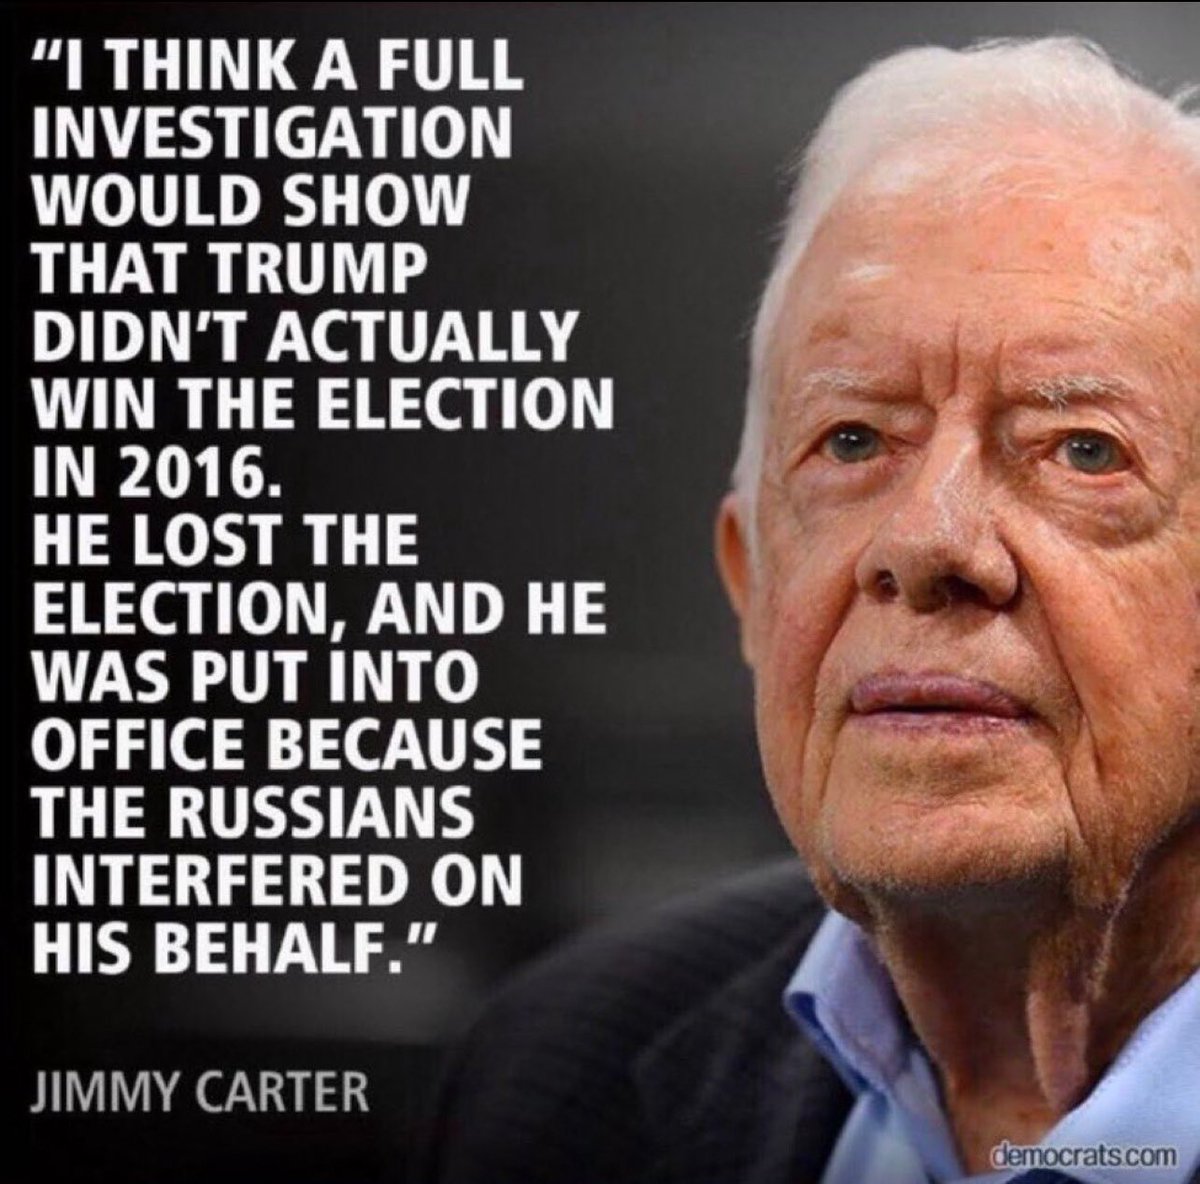 Let’s not forget that President Carter warned us.